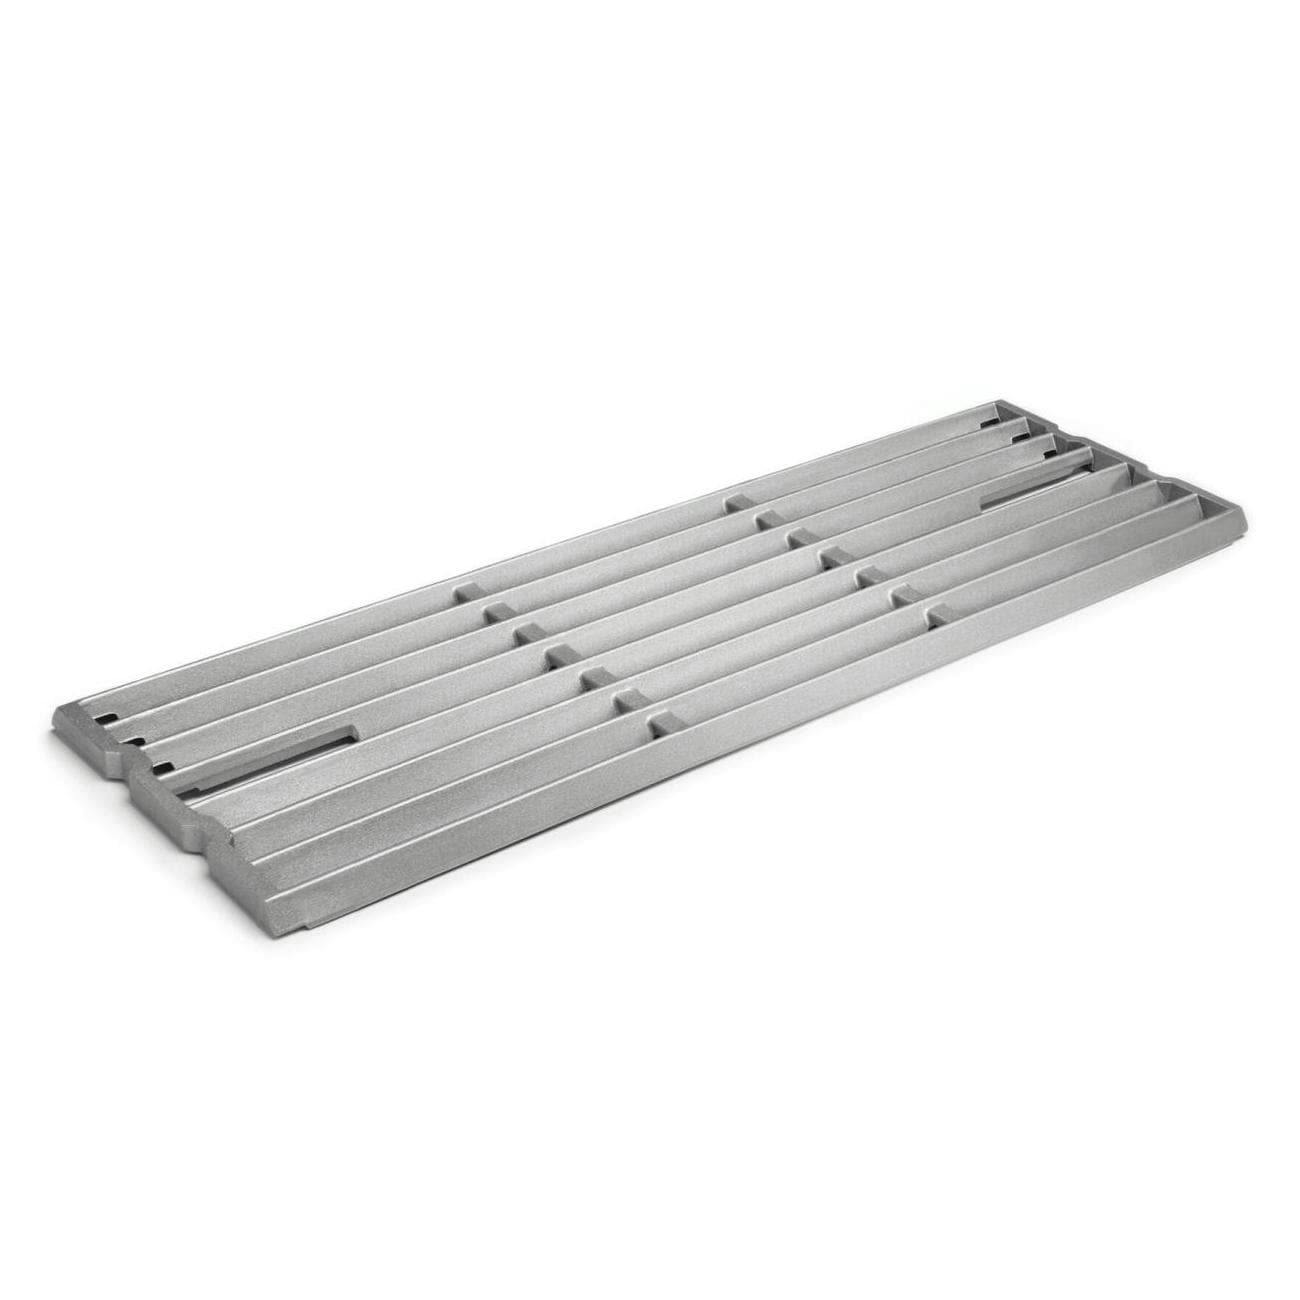 Broil King Cooking Grates for Regal and Imperial Grills